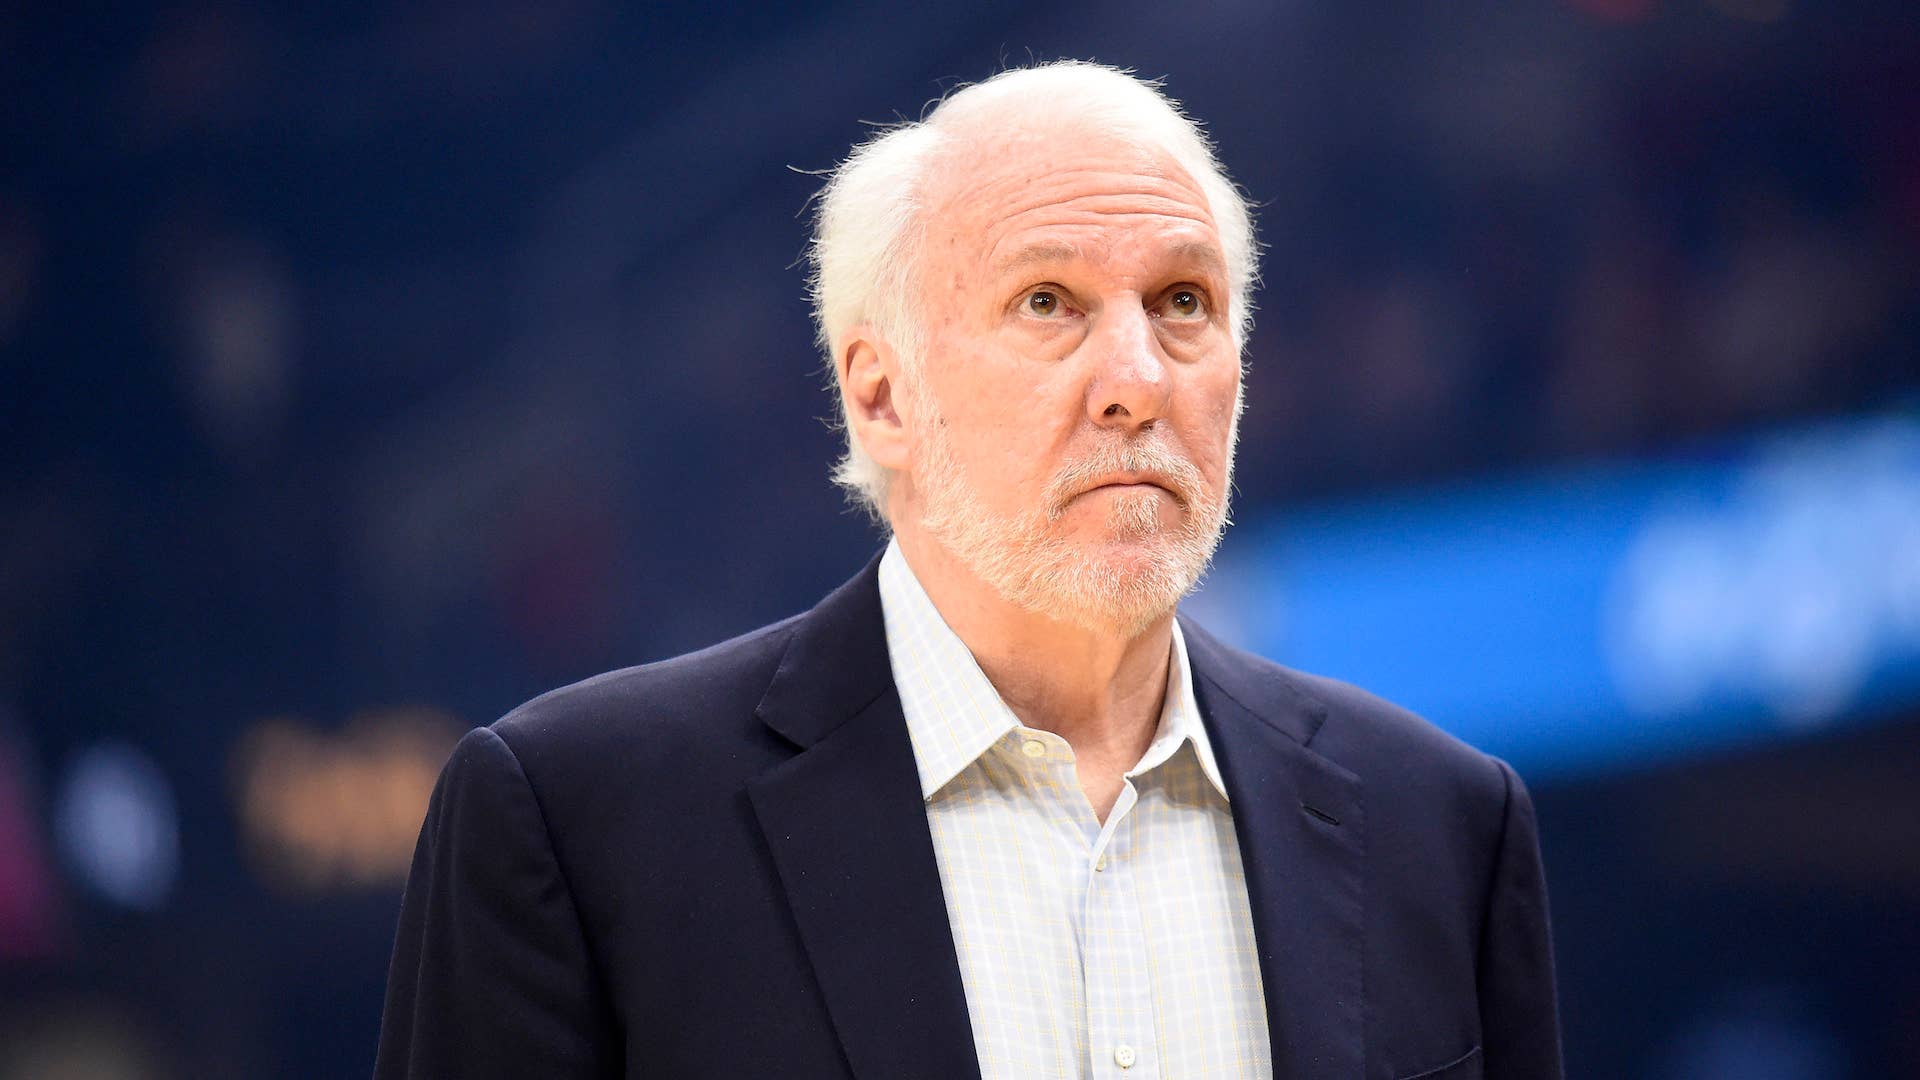 Gregg Popovich watches the scoreboard during first half against the Cavaliers.